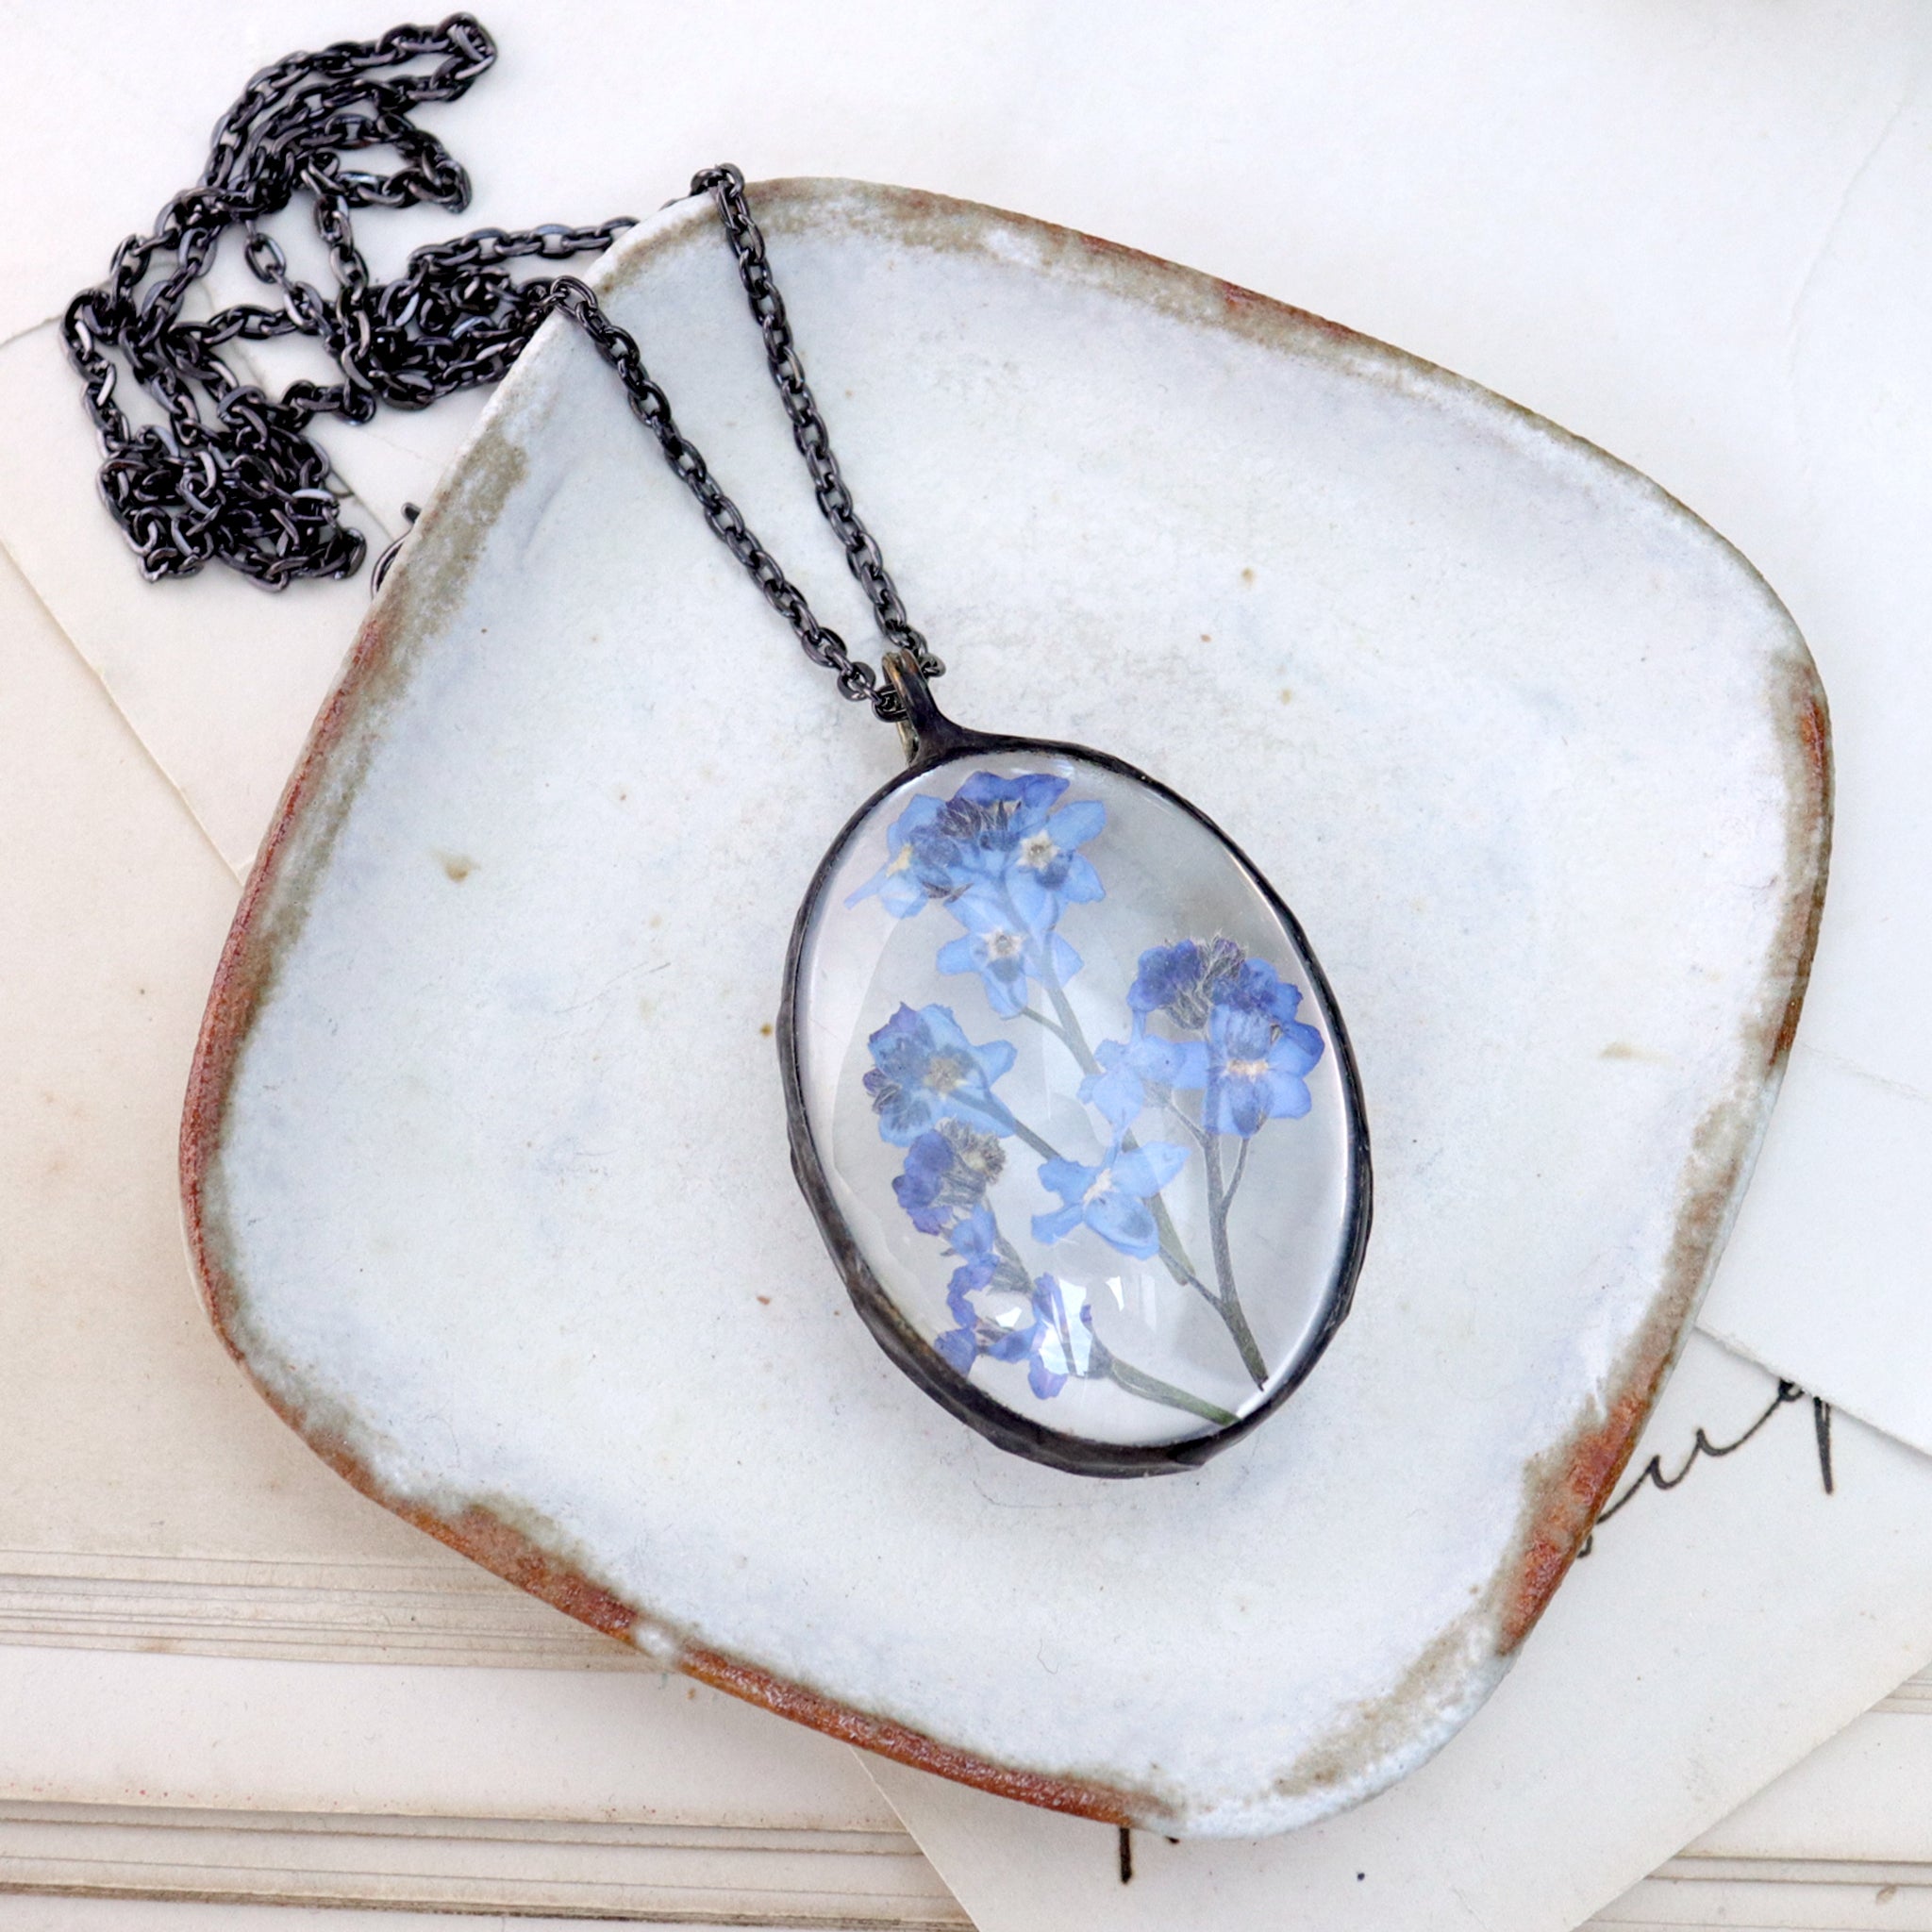 oval Forget-me-not necklace lying on a white dish